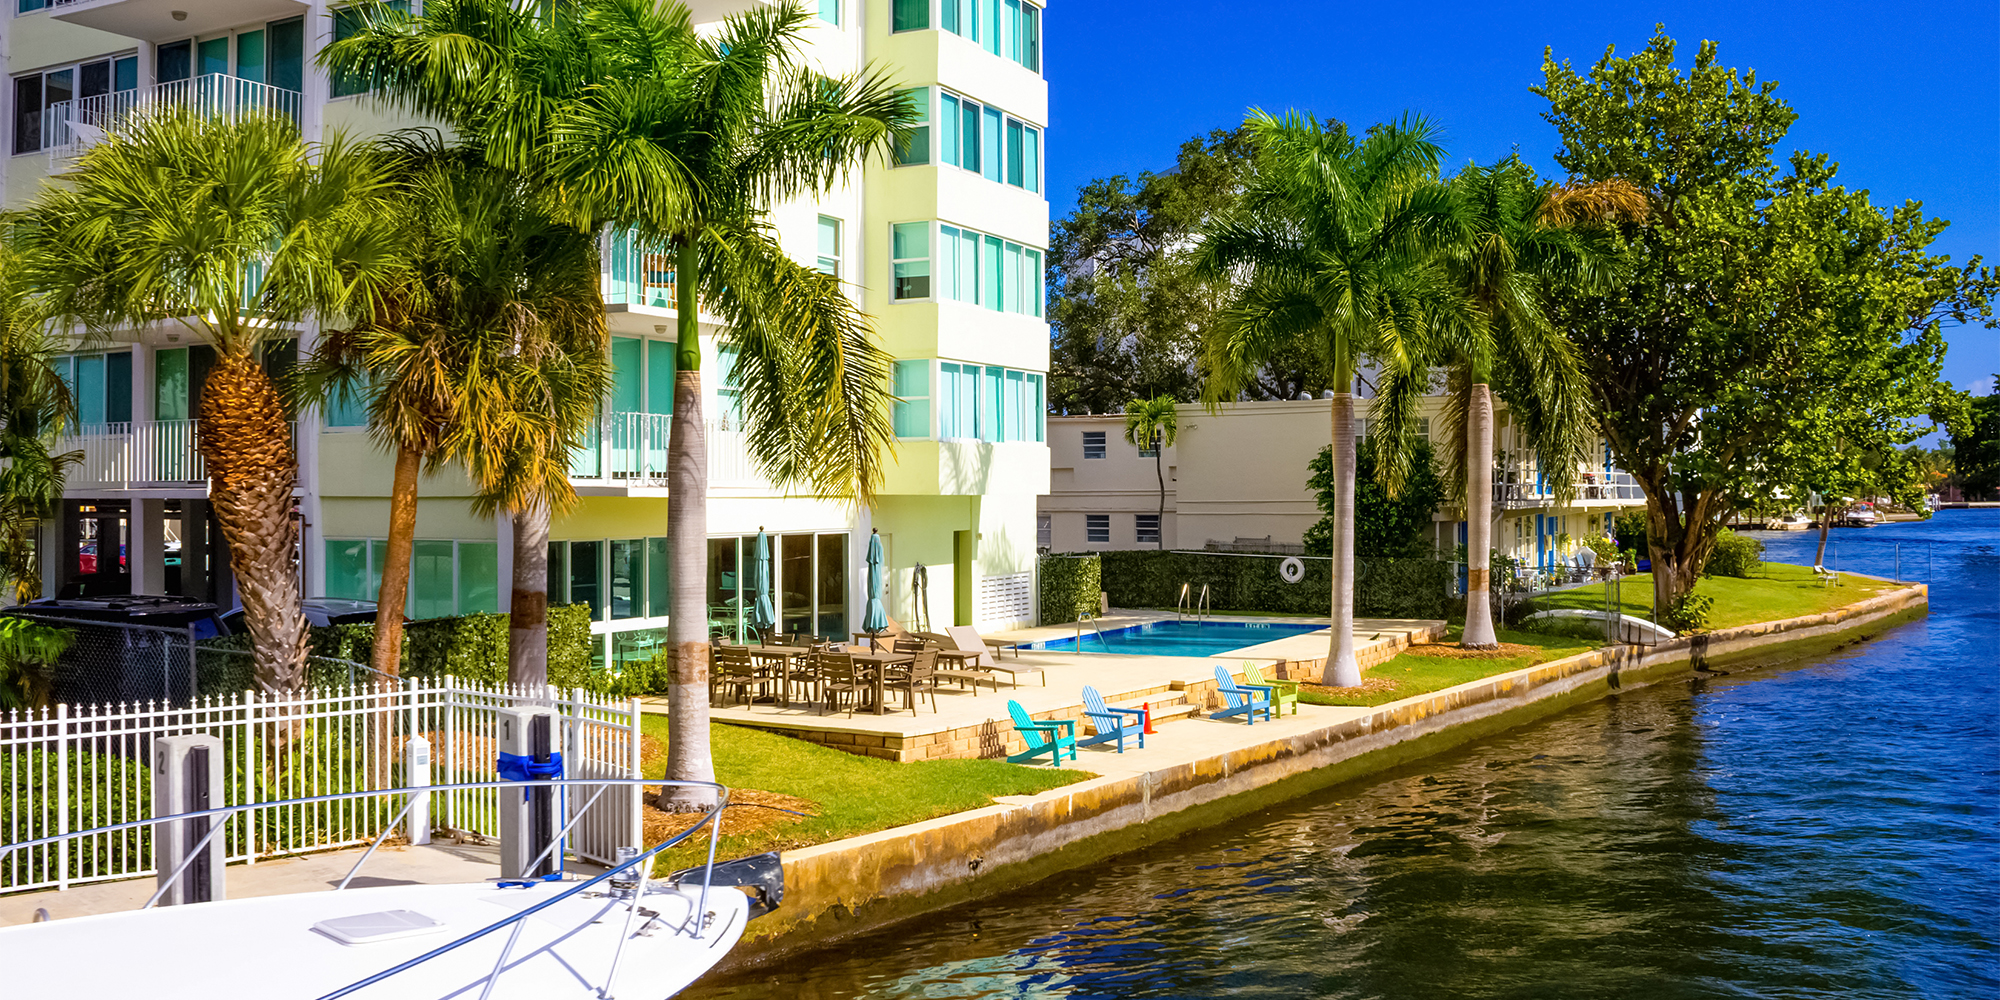 Cityscape of Ft Lauderdale Florida showing the beach and condominiums